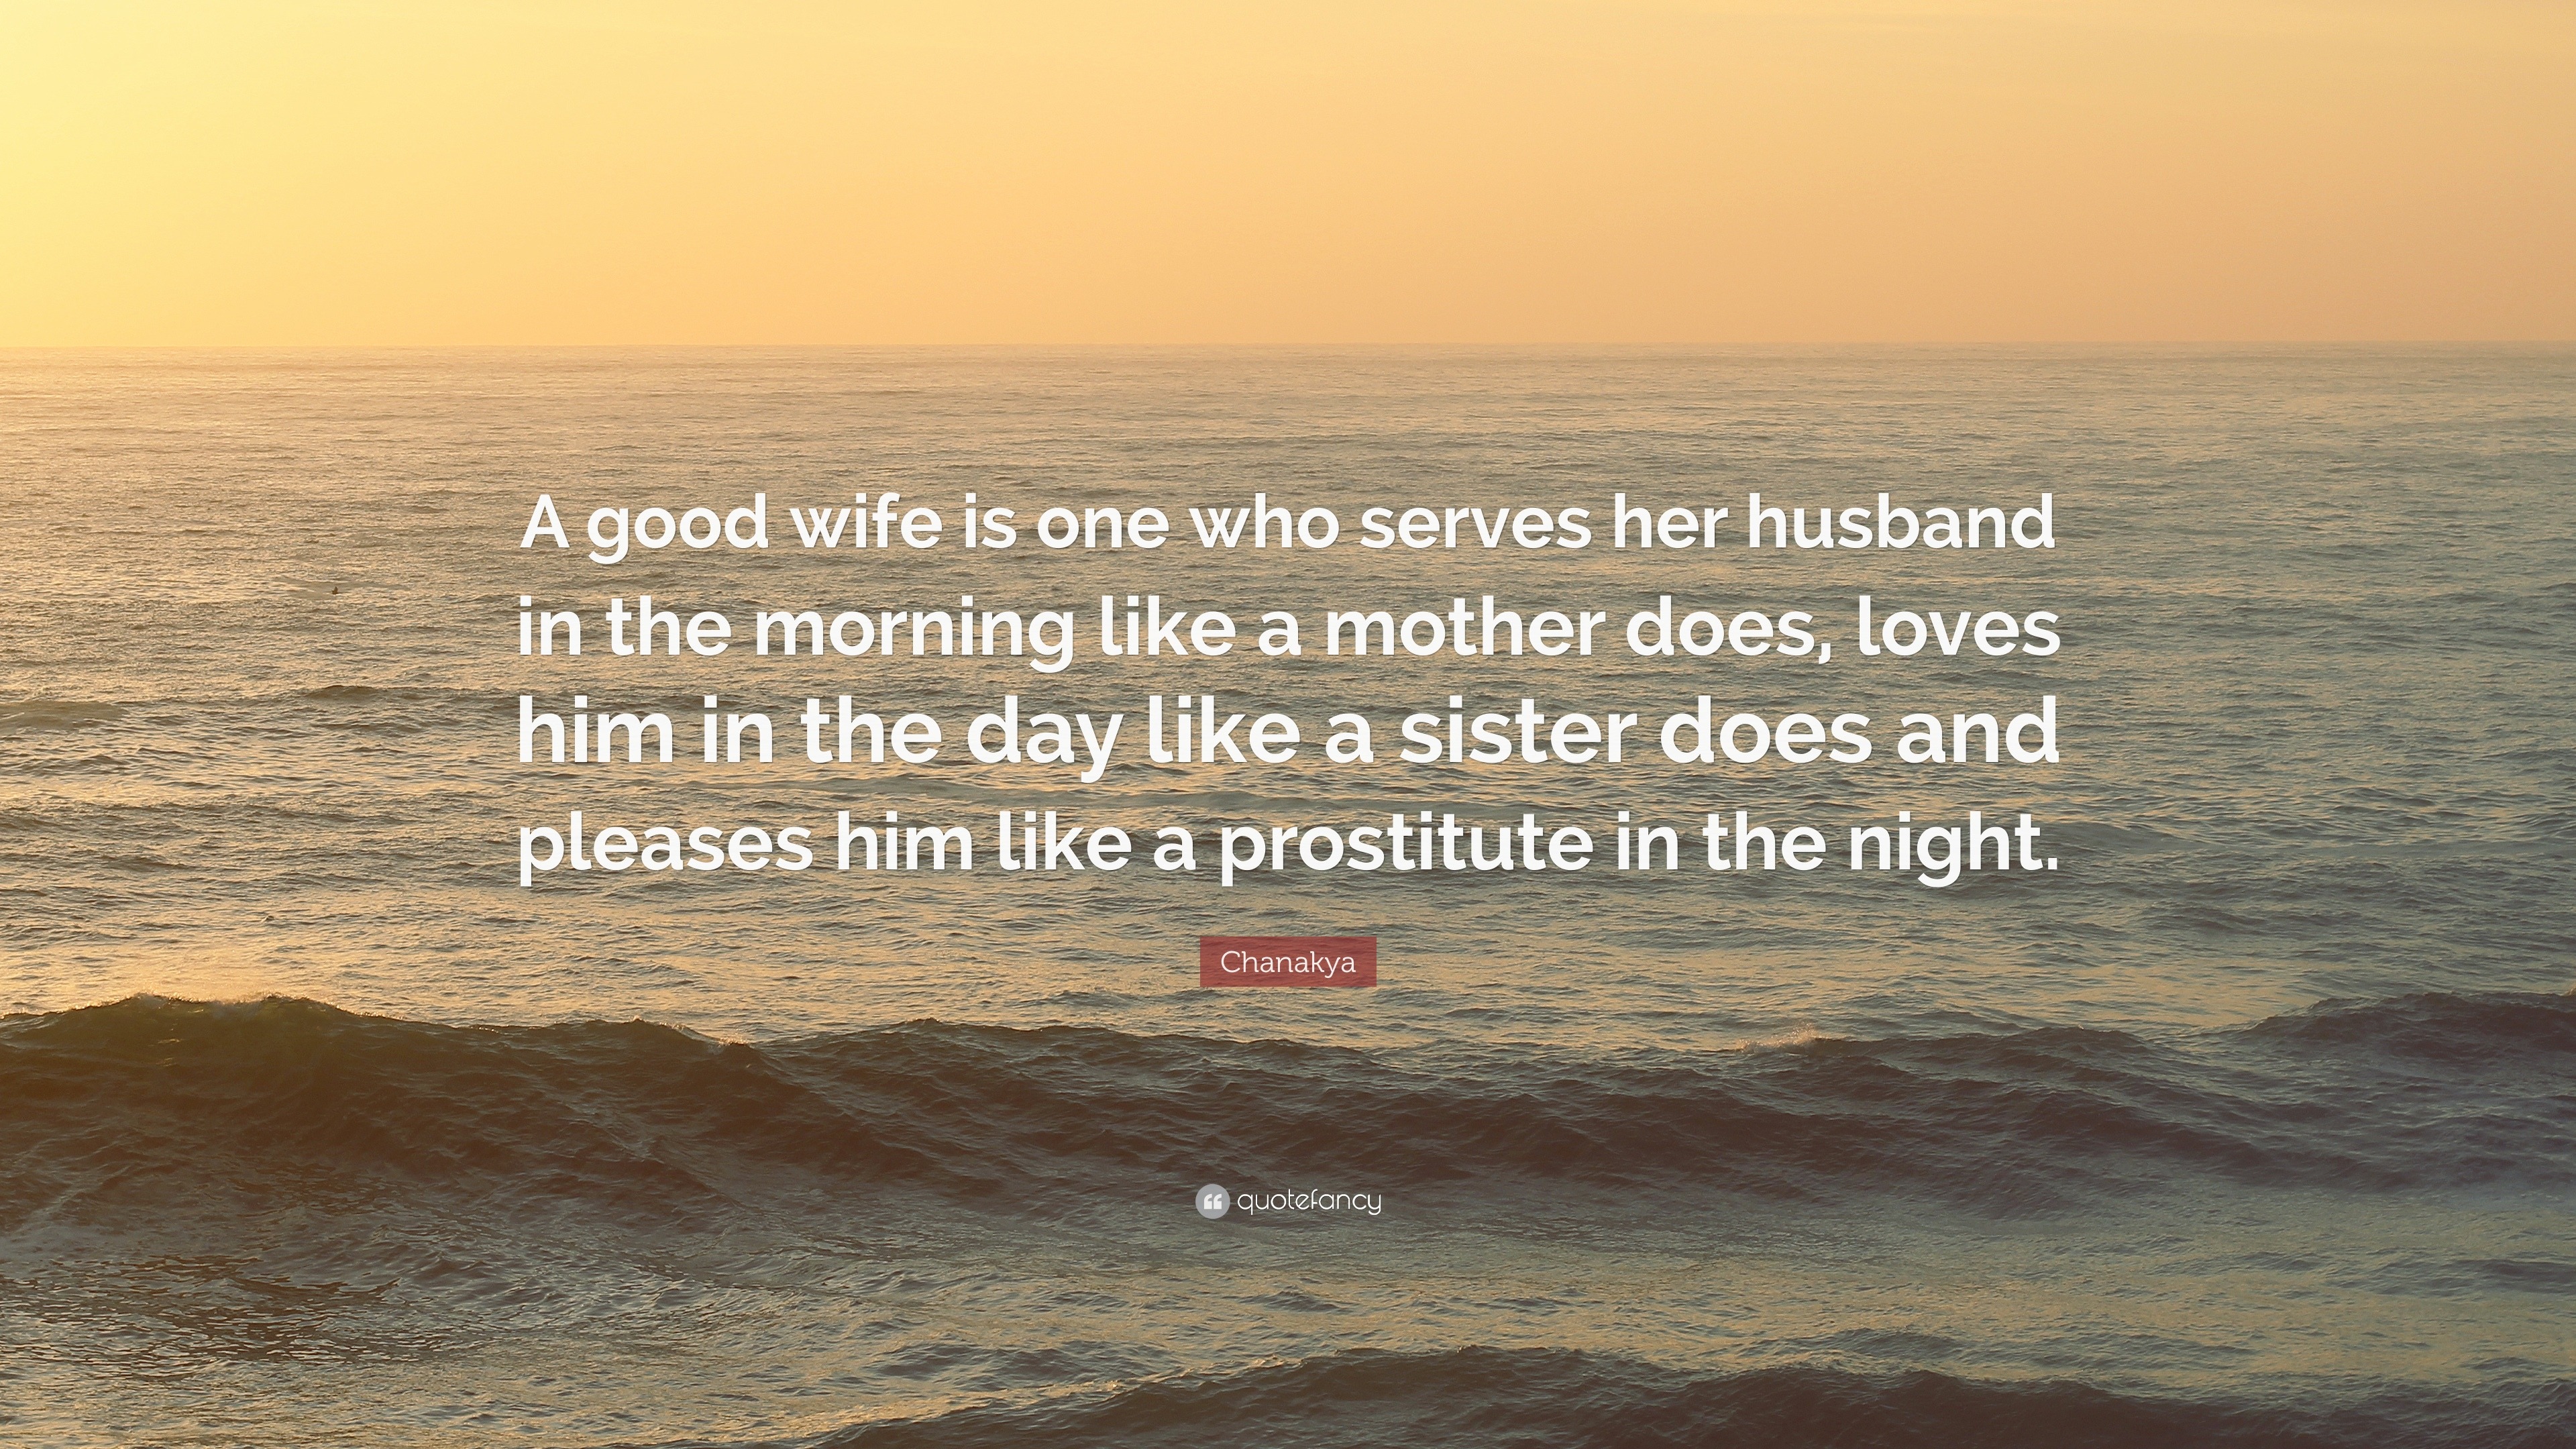 Chanakya Quote “A good wife is one who serves her husband in the morning